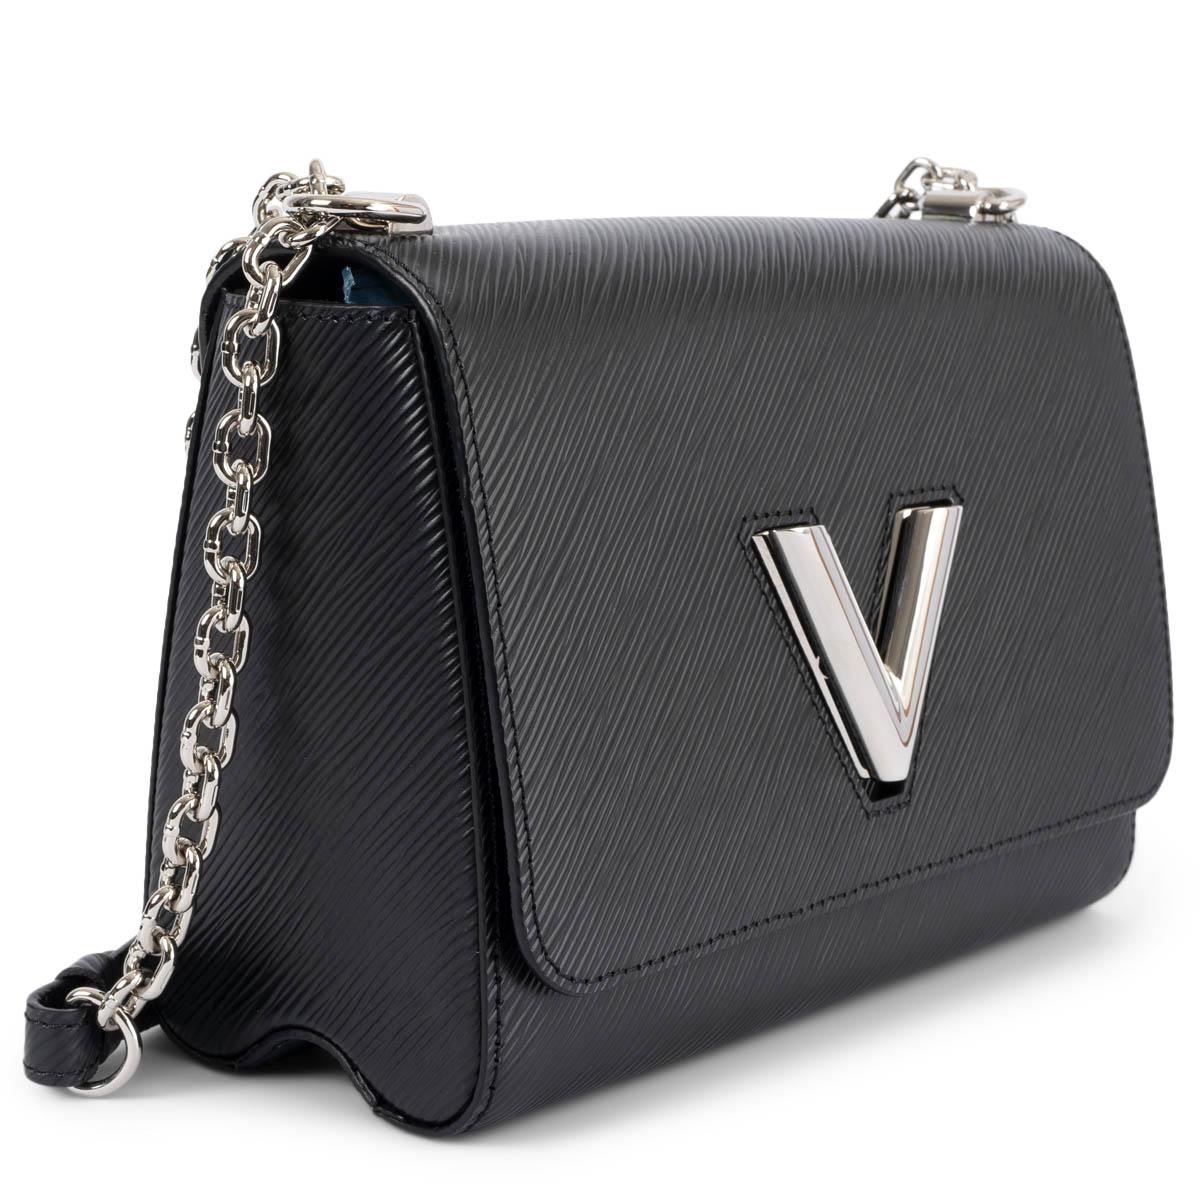 100% authentic Louis Vuitton Twist MM in black Epi leather with silver-tone hardware. The design features the iconic LV turn-lock on the front. The sliding chain strap can be doubled for shoulder carry or lengthened for cross-body wear. Lined in